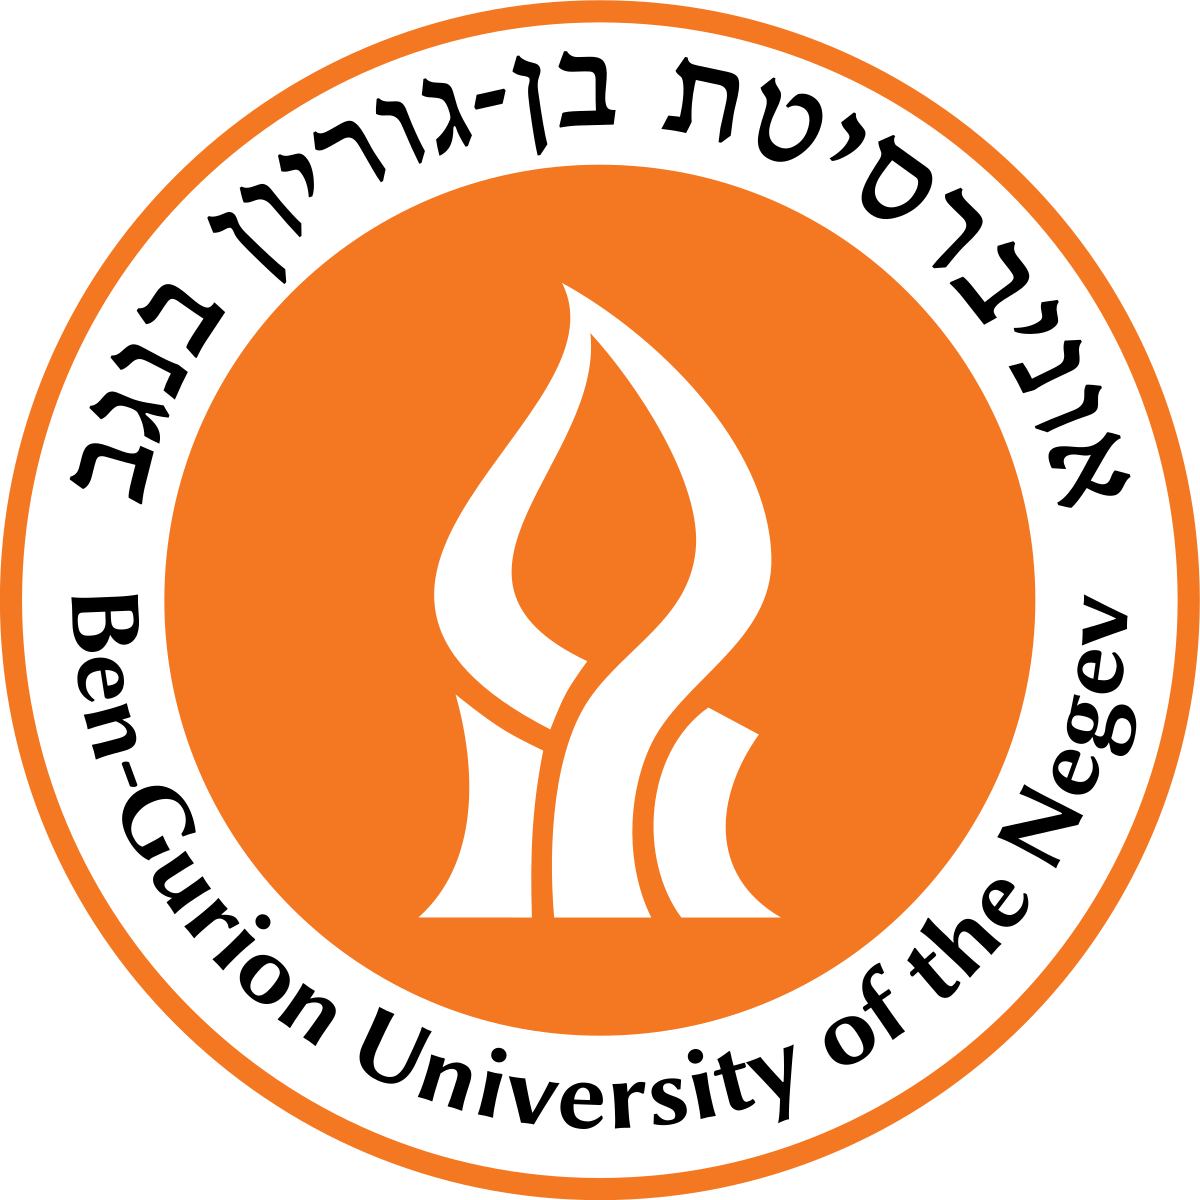 Ben-Gurion University, Israel to Establish Agricultural Research Institute in India